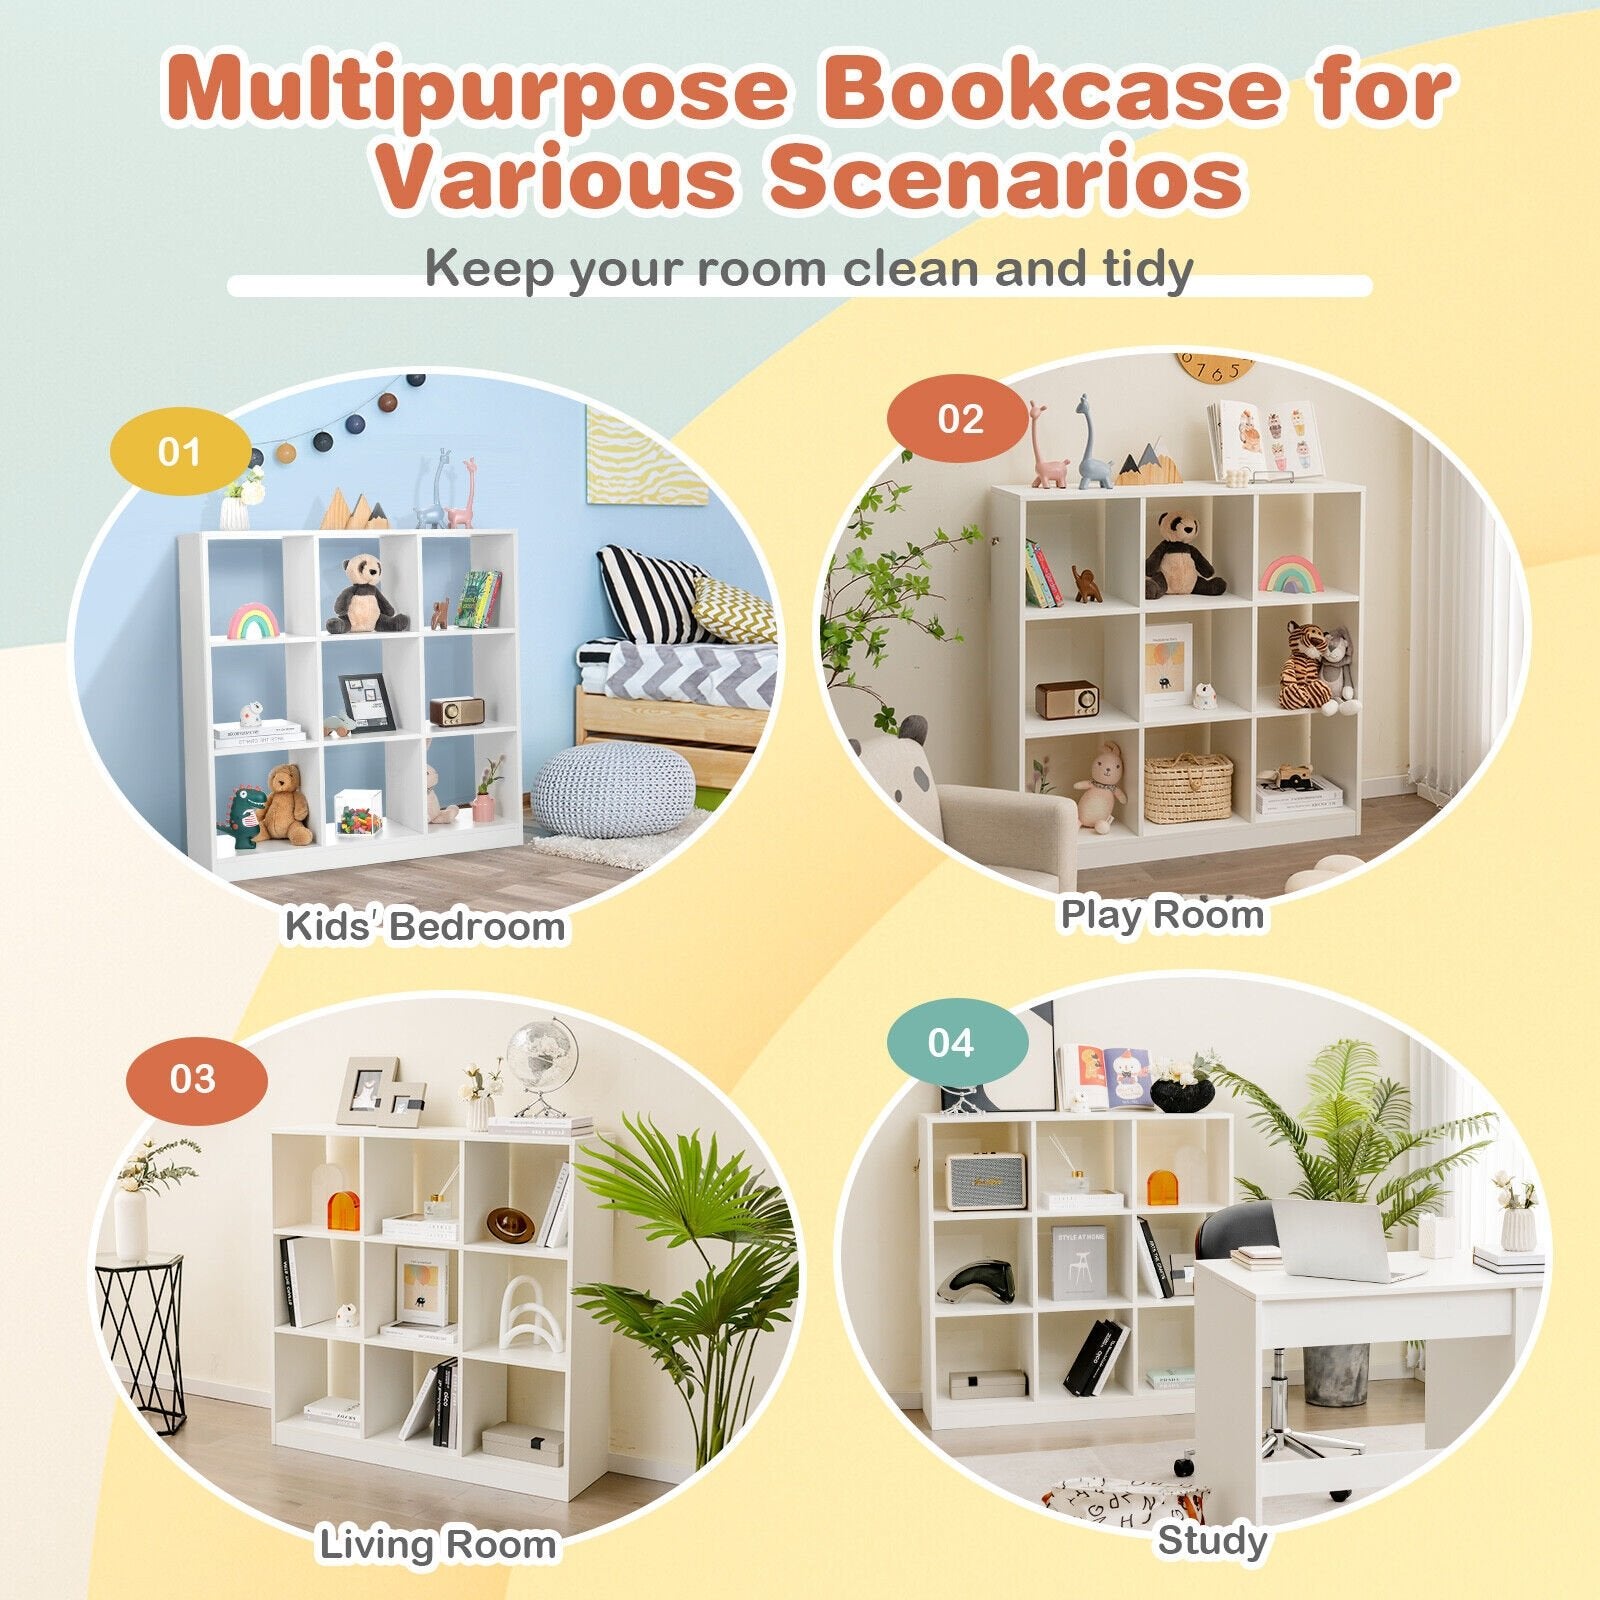 Modern 9-Cube Bookcase with 2 Anti-Tipping Kits for Books Toys Ornaments, White - Gallery Canada